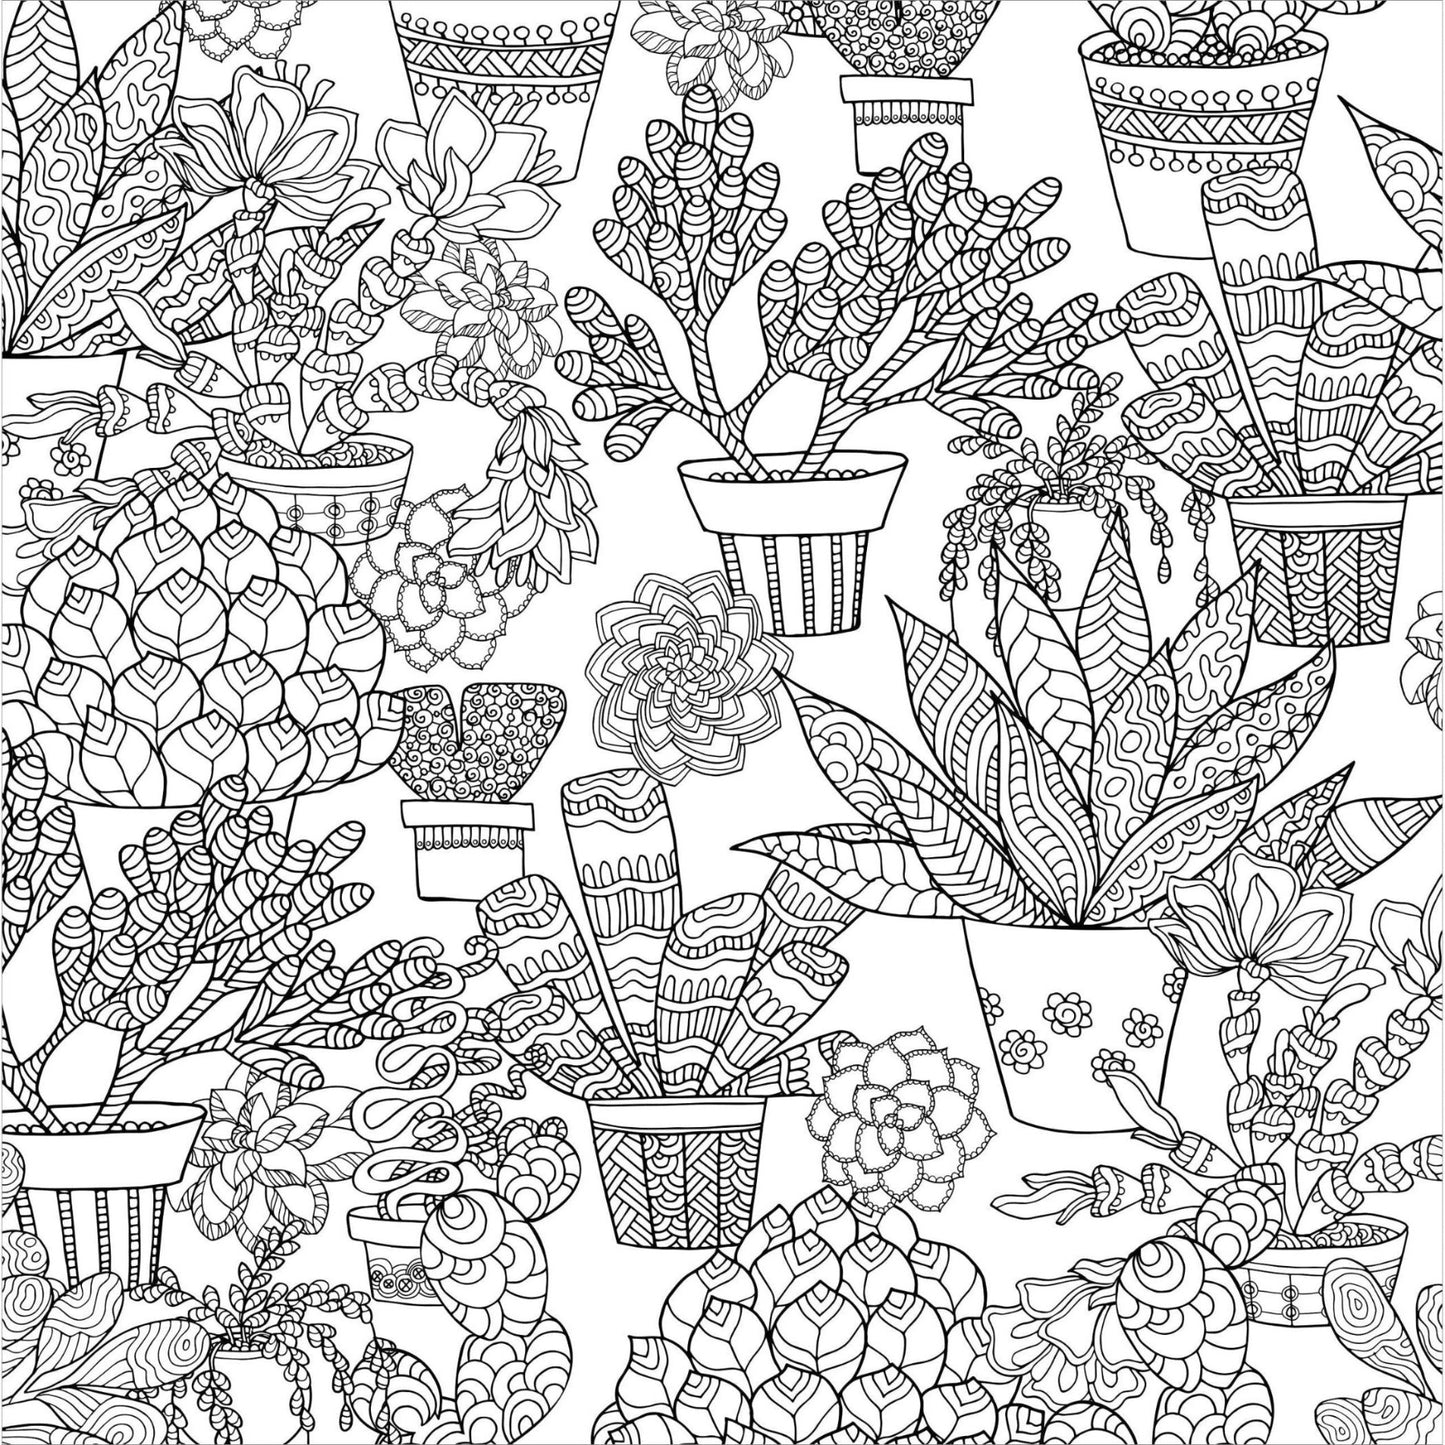 Succulents Adult Coloring Book | 31 Relaxing Plants Illustrations